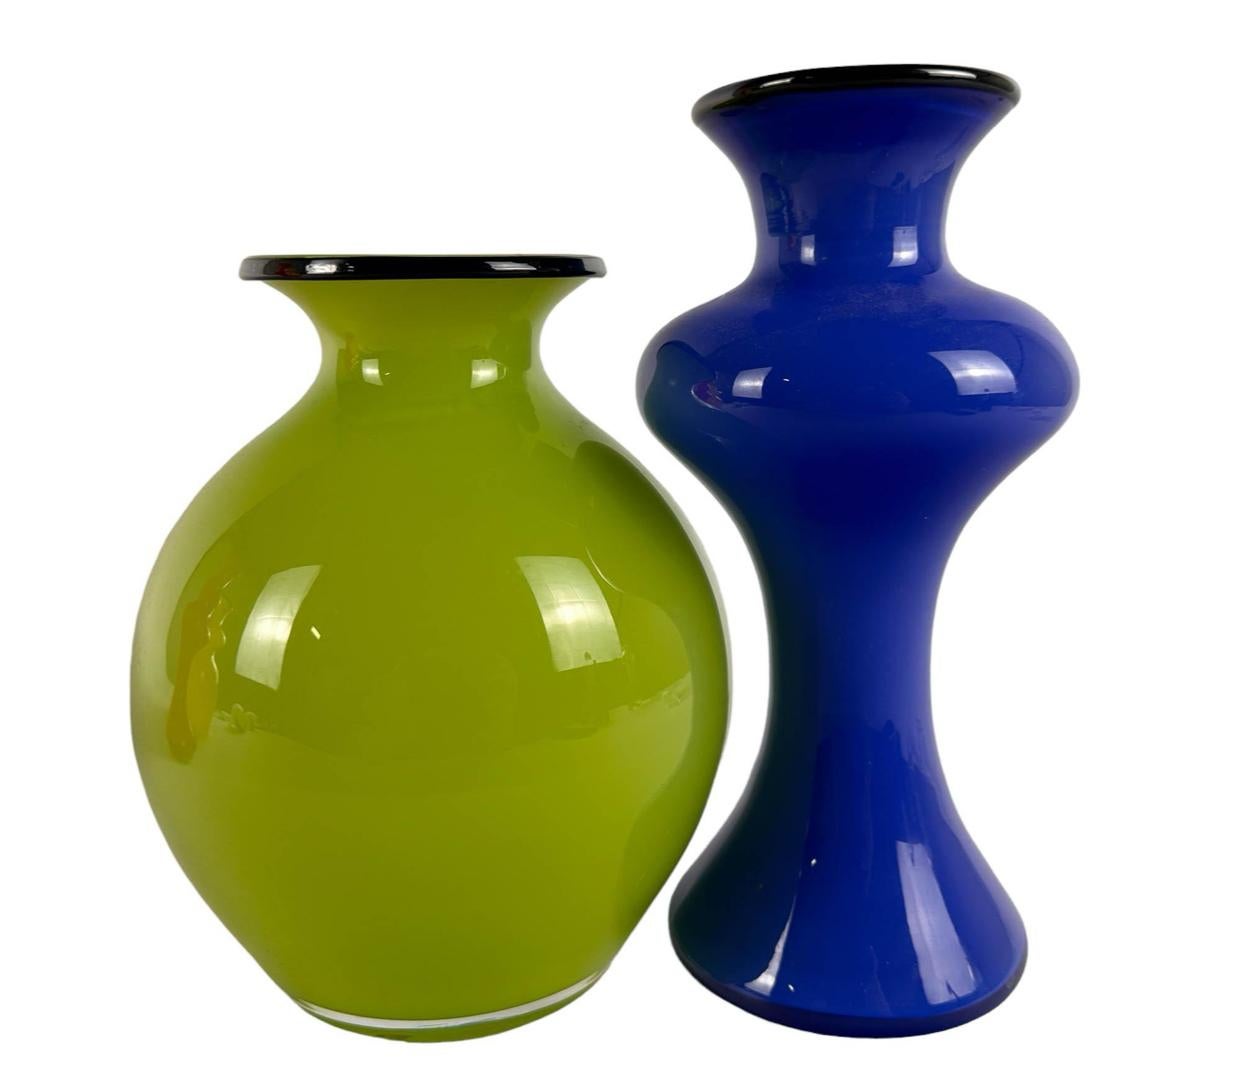 A collection of four vintage art glass decanters by Swedish Design Studio Strombergshyttan. Colors include; bold yellow glass, green, blue and red, each having a black glass ring around the top lip. Their are only two stoppers, which feature a